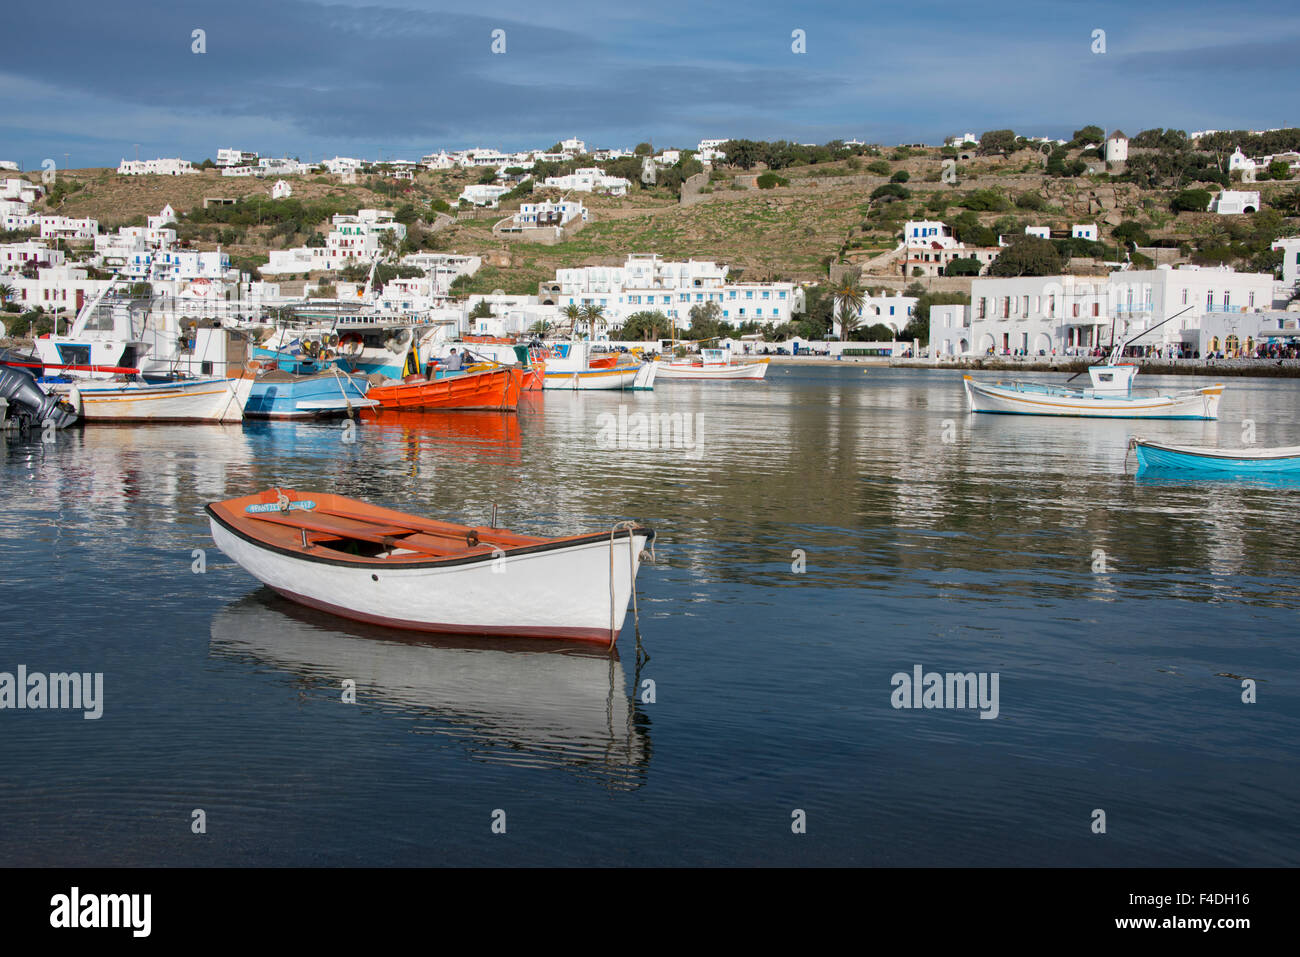 Greece, Cyclades, Mykonos, Hora. Port and harbor area with Greek fishing boats. Island countryside and local fishermen in the distance. (Large format sizes available). Stock Photo